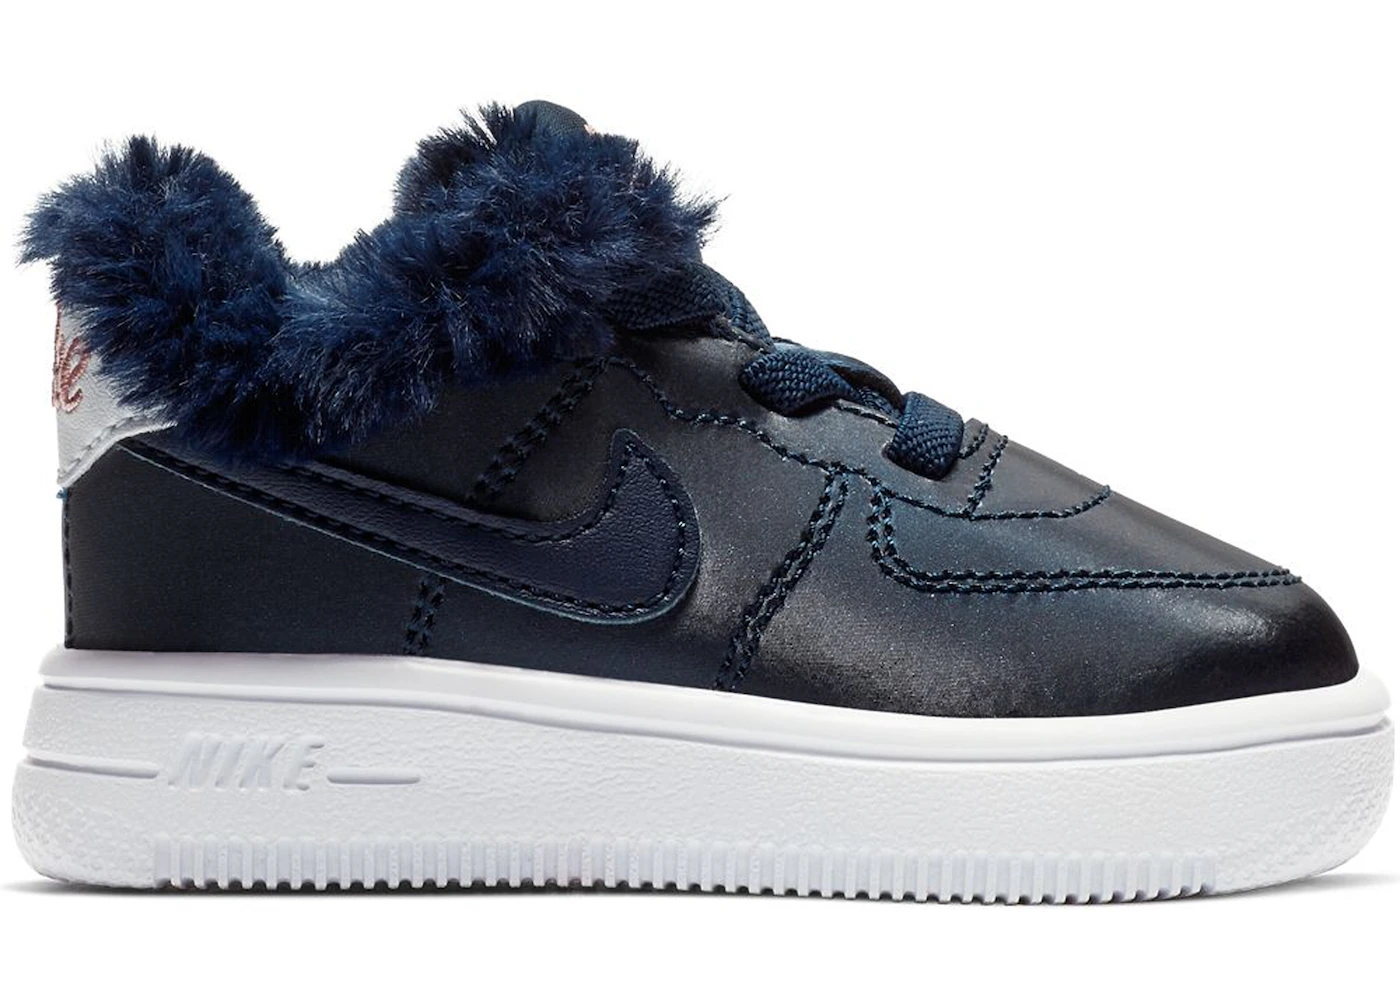 Nike Air Force 1 Low Valentine's Day Obsidian (2019) (TD)